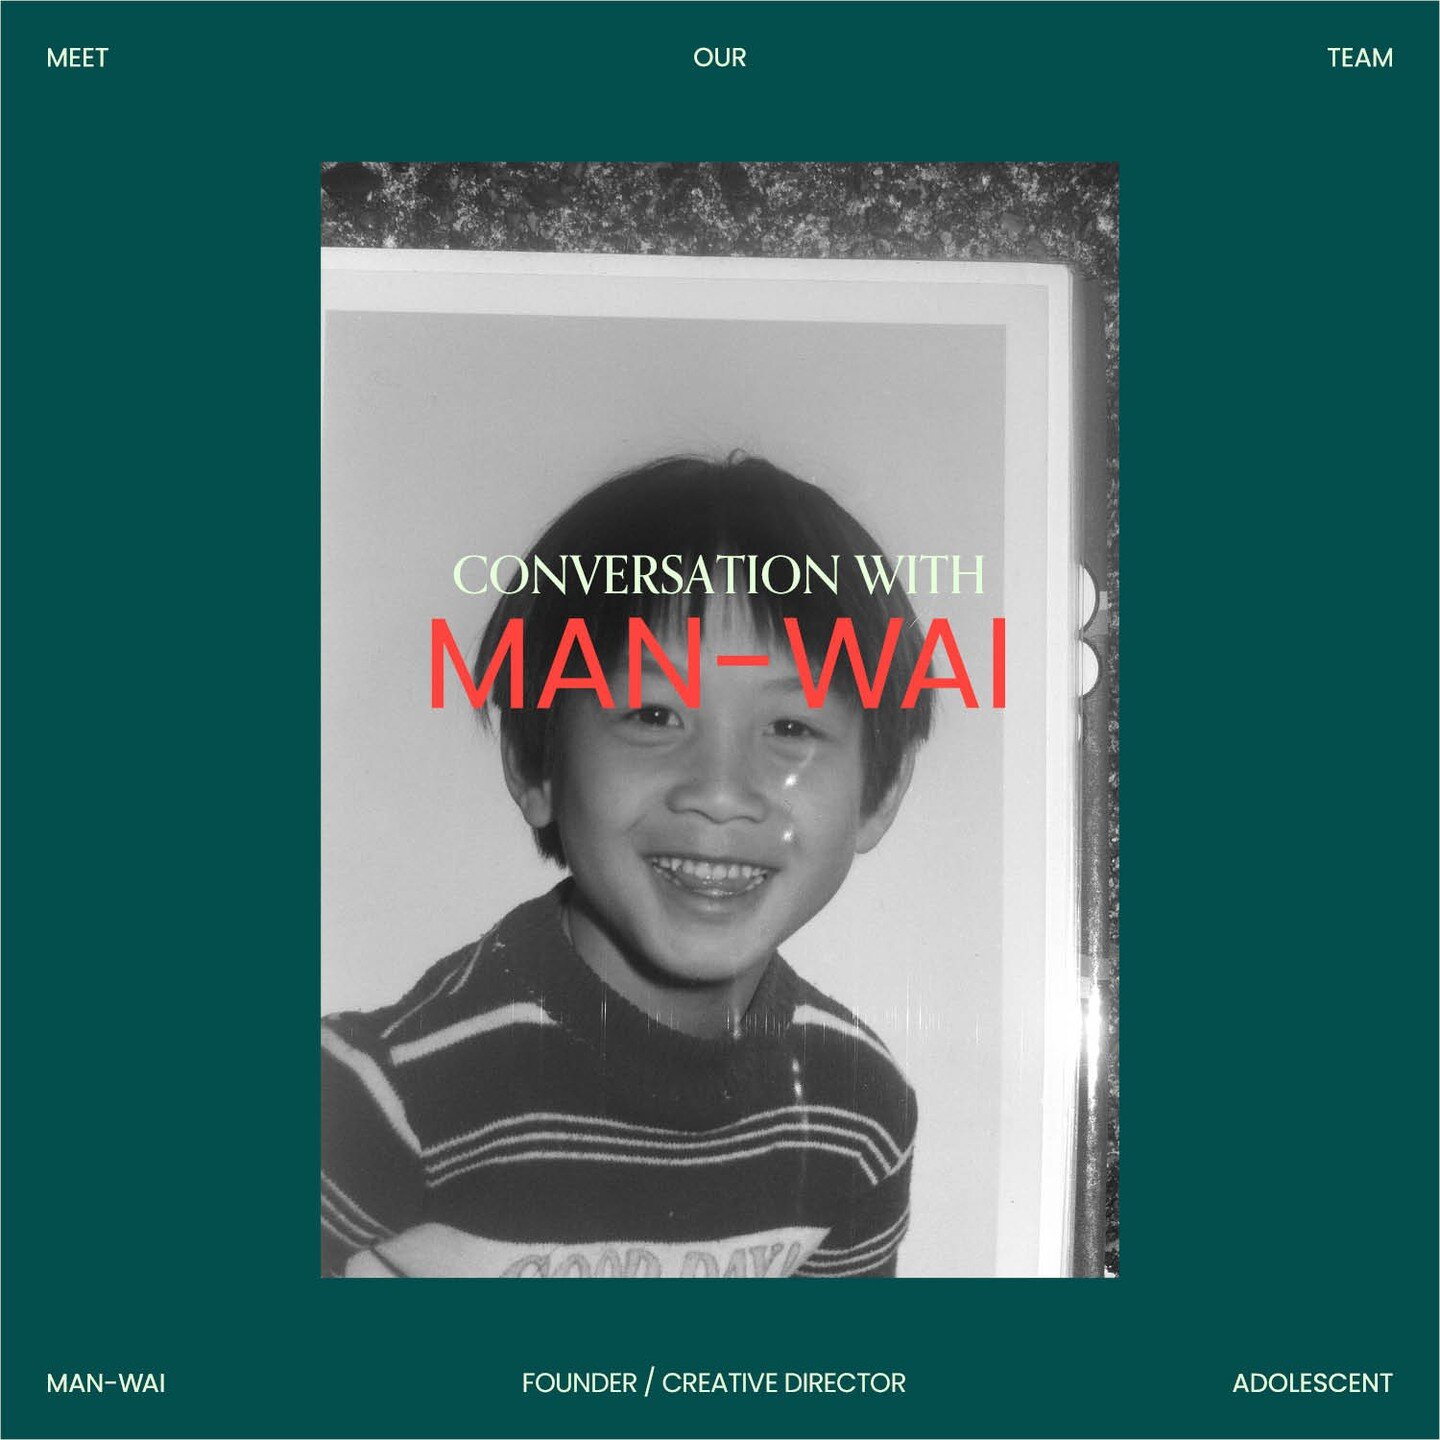 Introducing our fearless leader, Man-Wai! He&rsquo;s a true design nerd with a passion for all delicious food